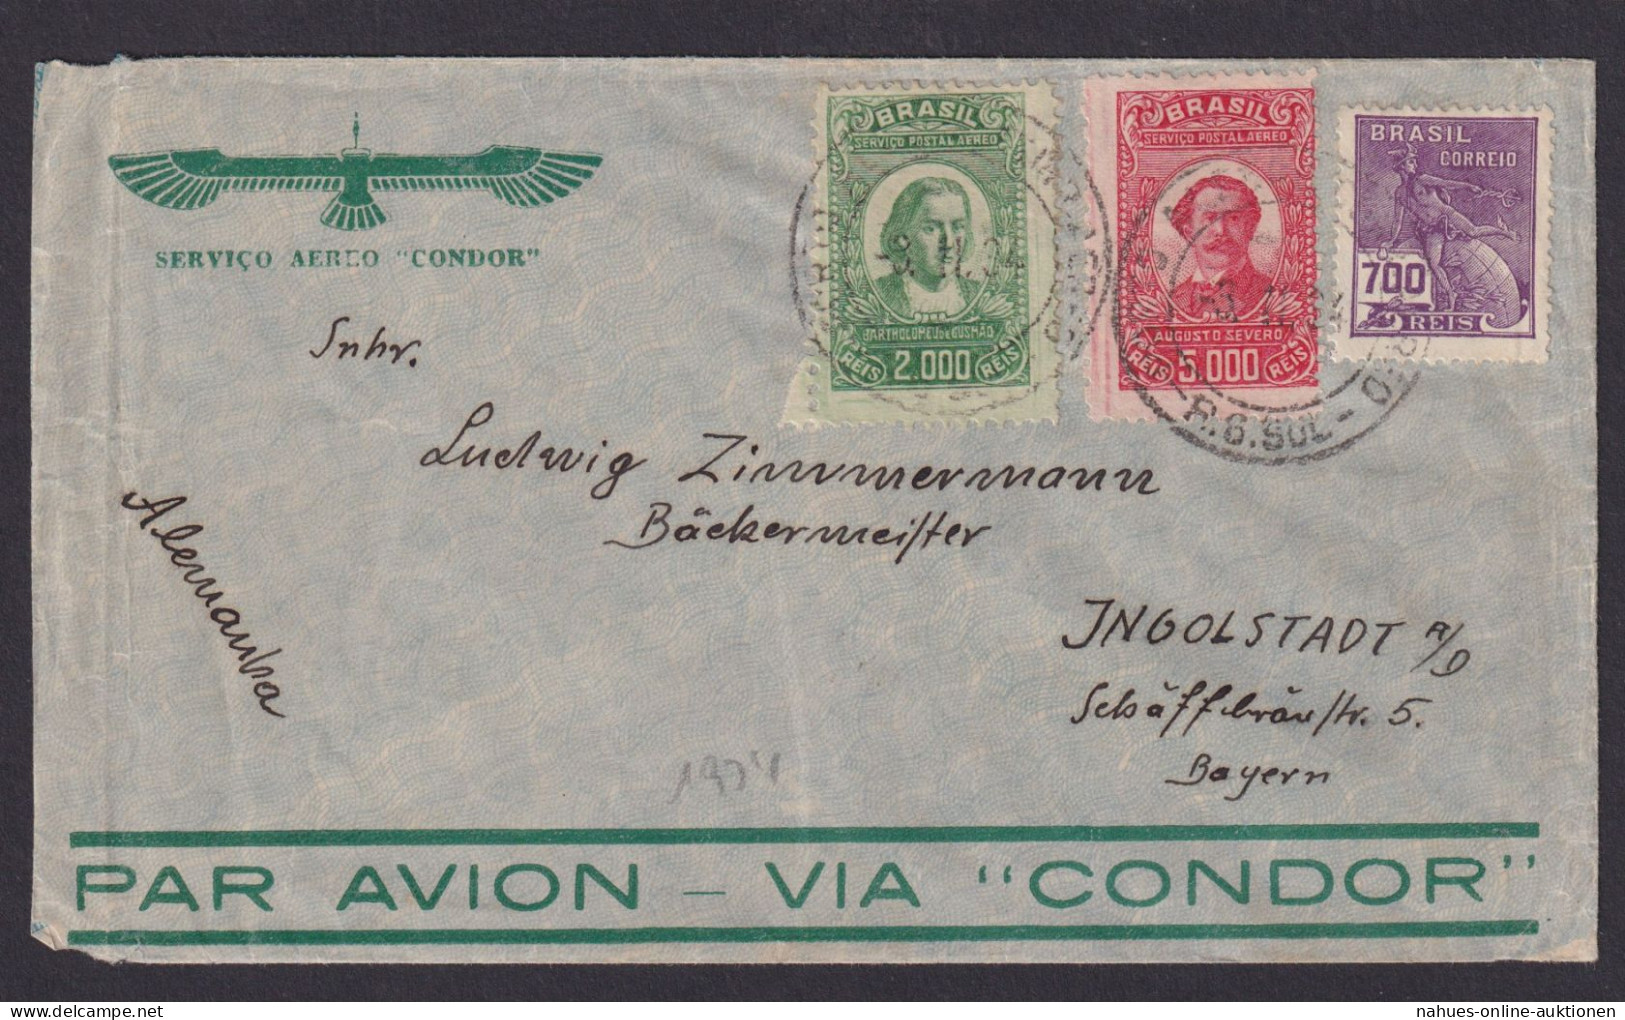 Flugpost Air Mail Condor Brasilien MIF Nach Ingolstadt Bayern 3.11.1934 - Covers & Documents